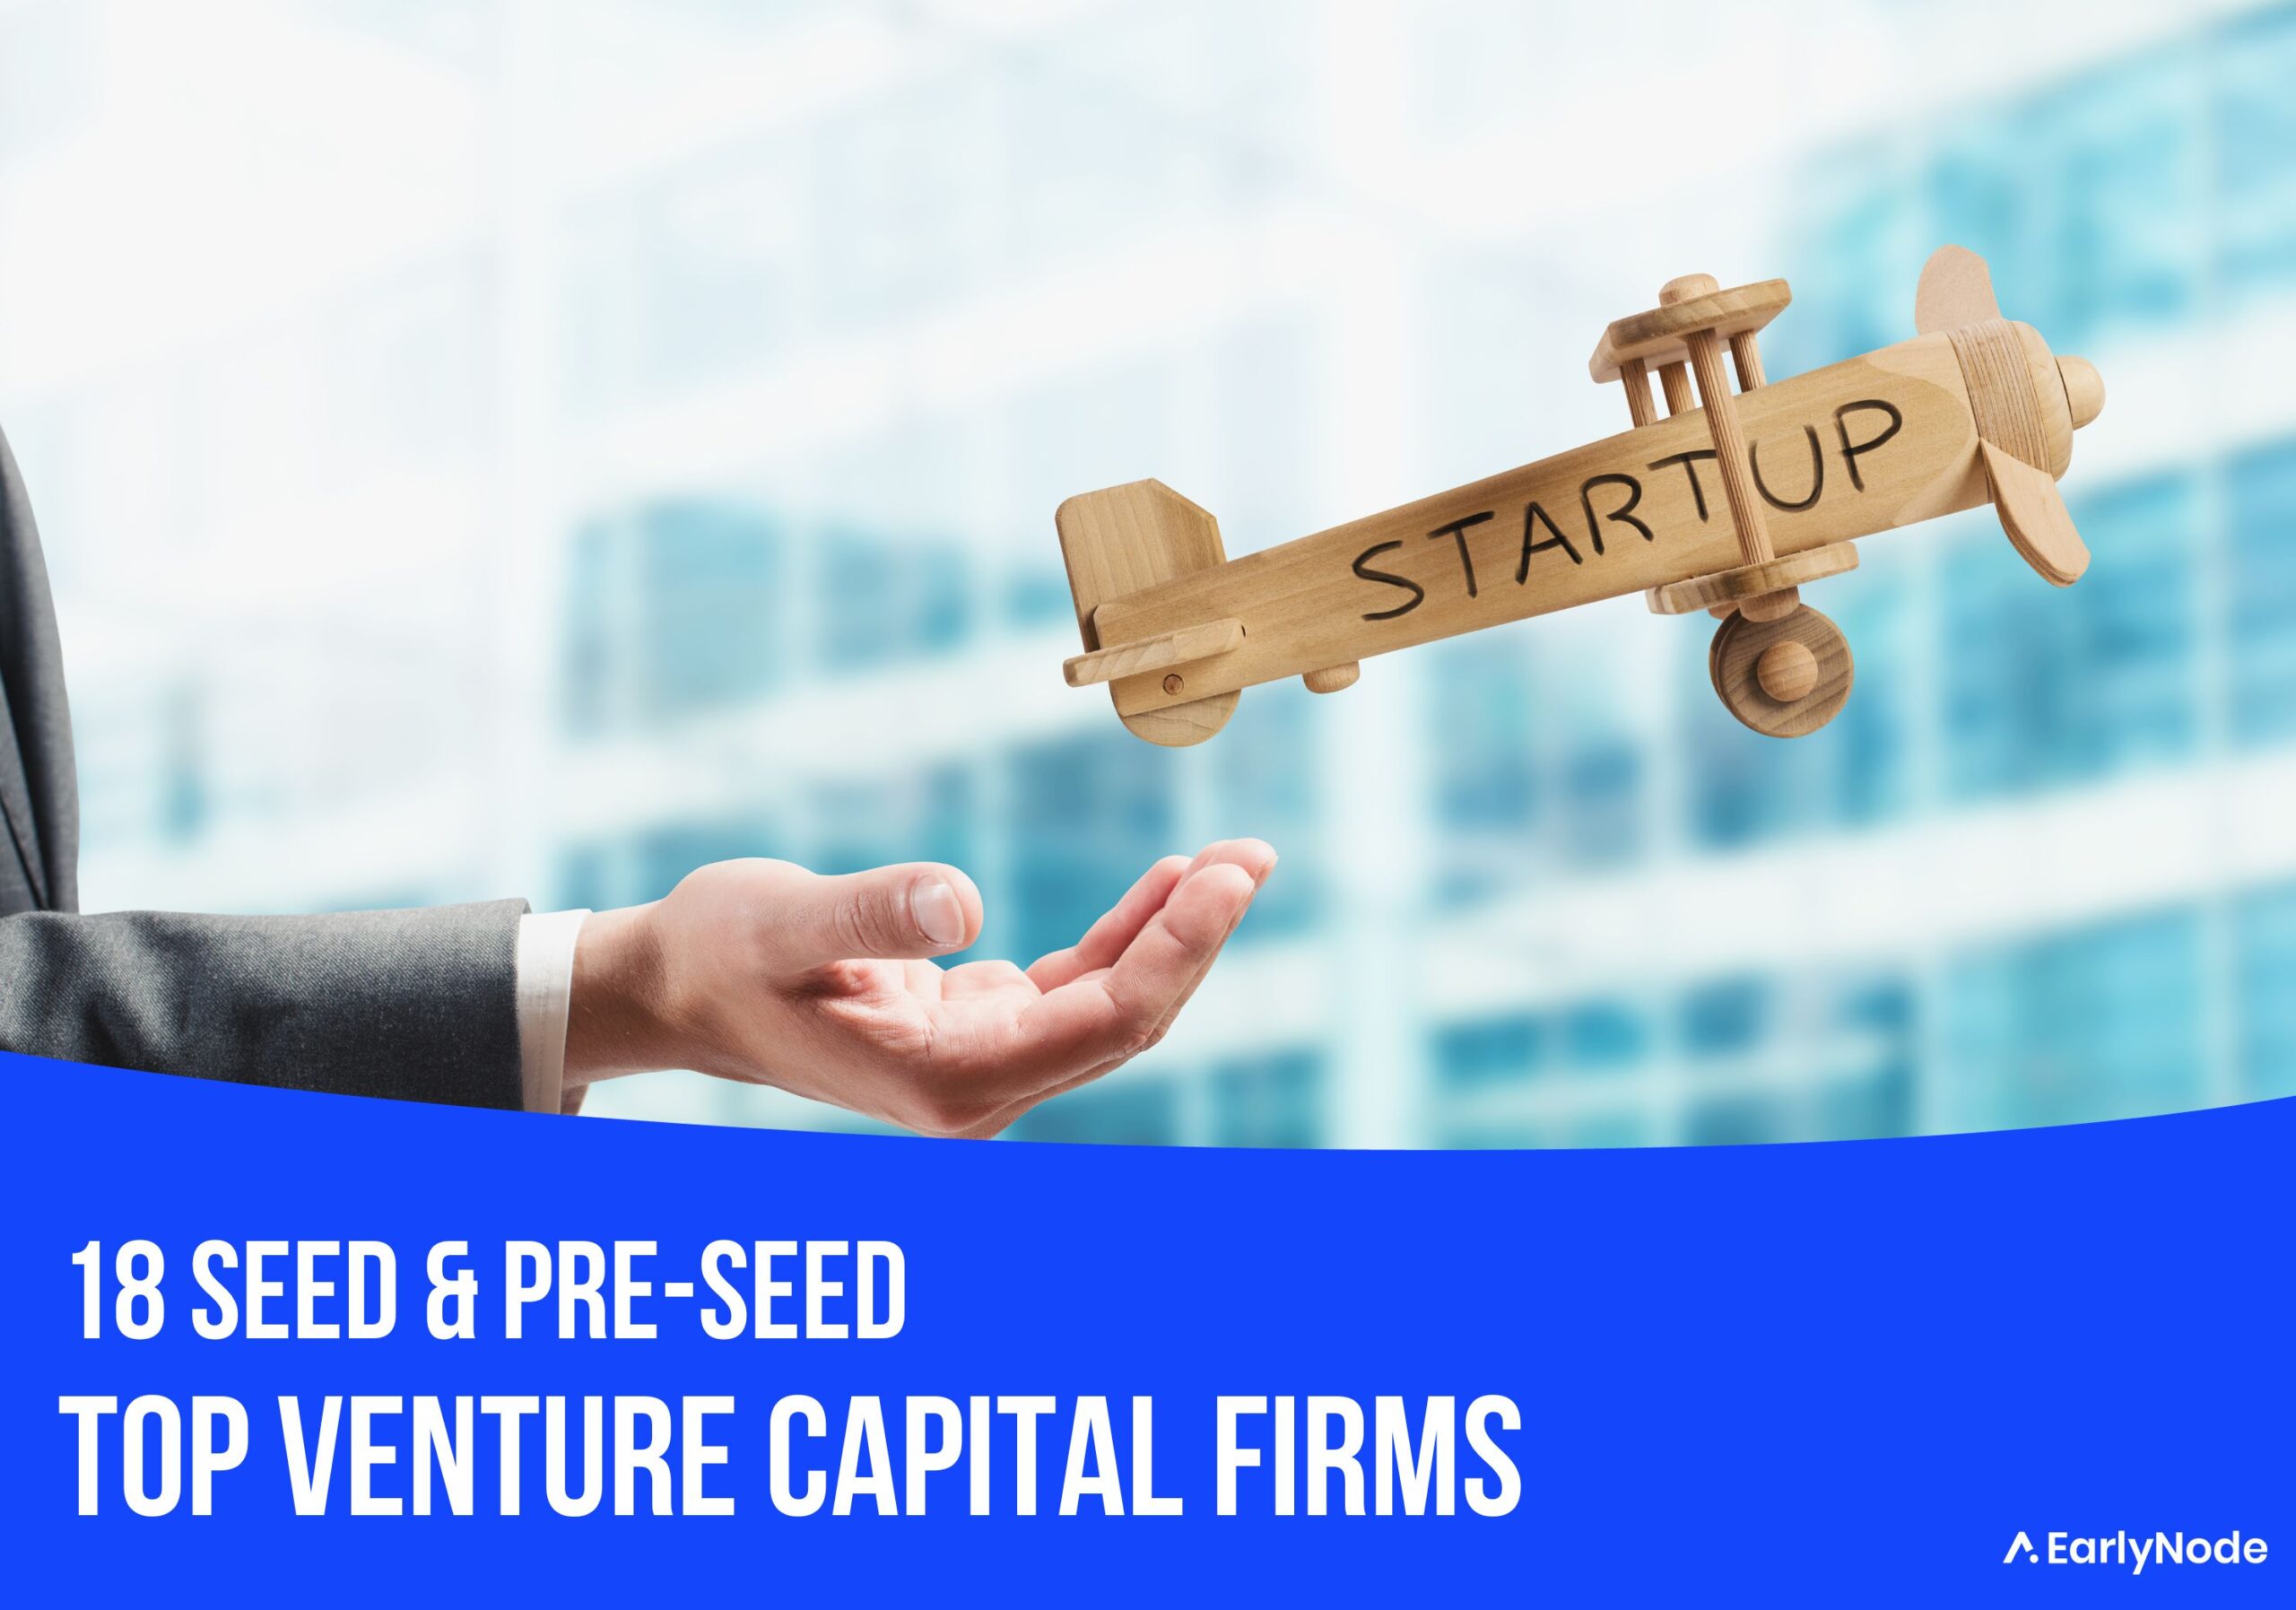 18 Seed & Pre-seed Top Venture Capital Firms